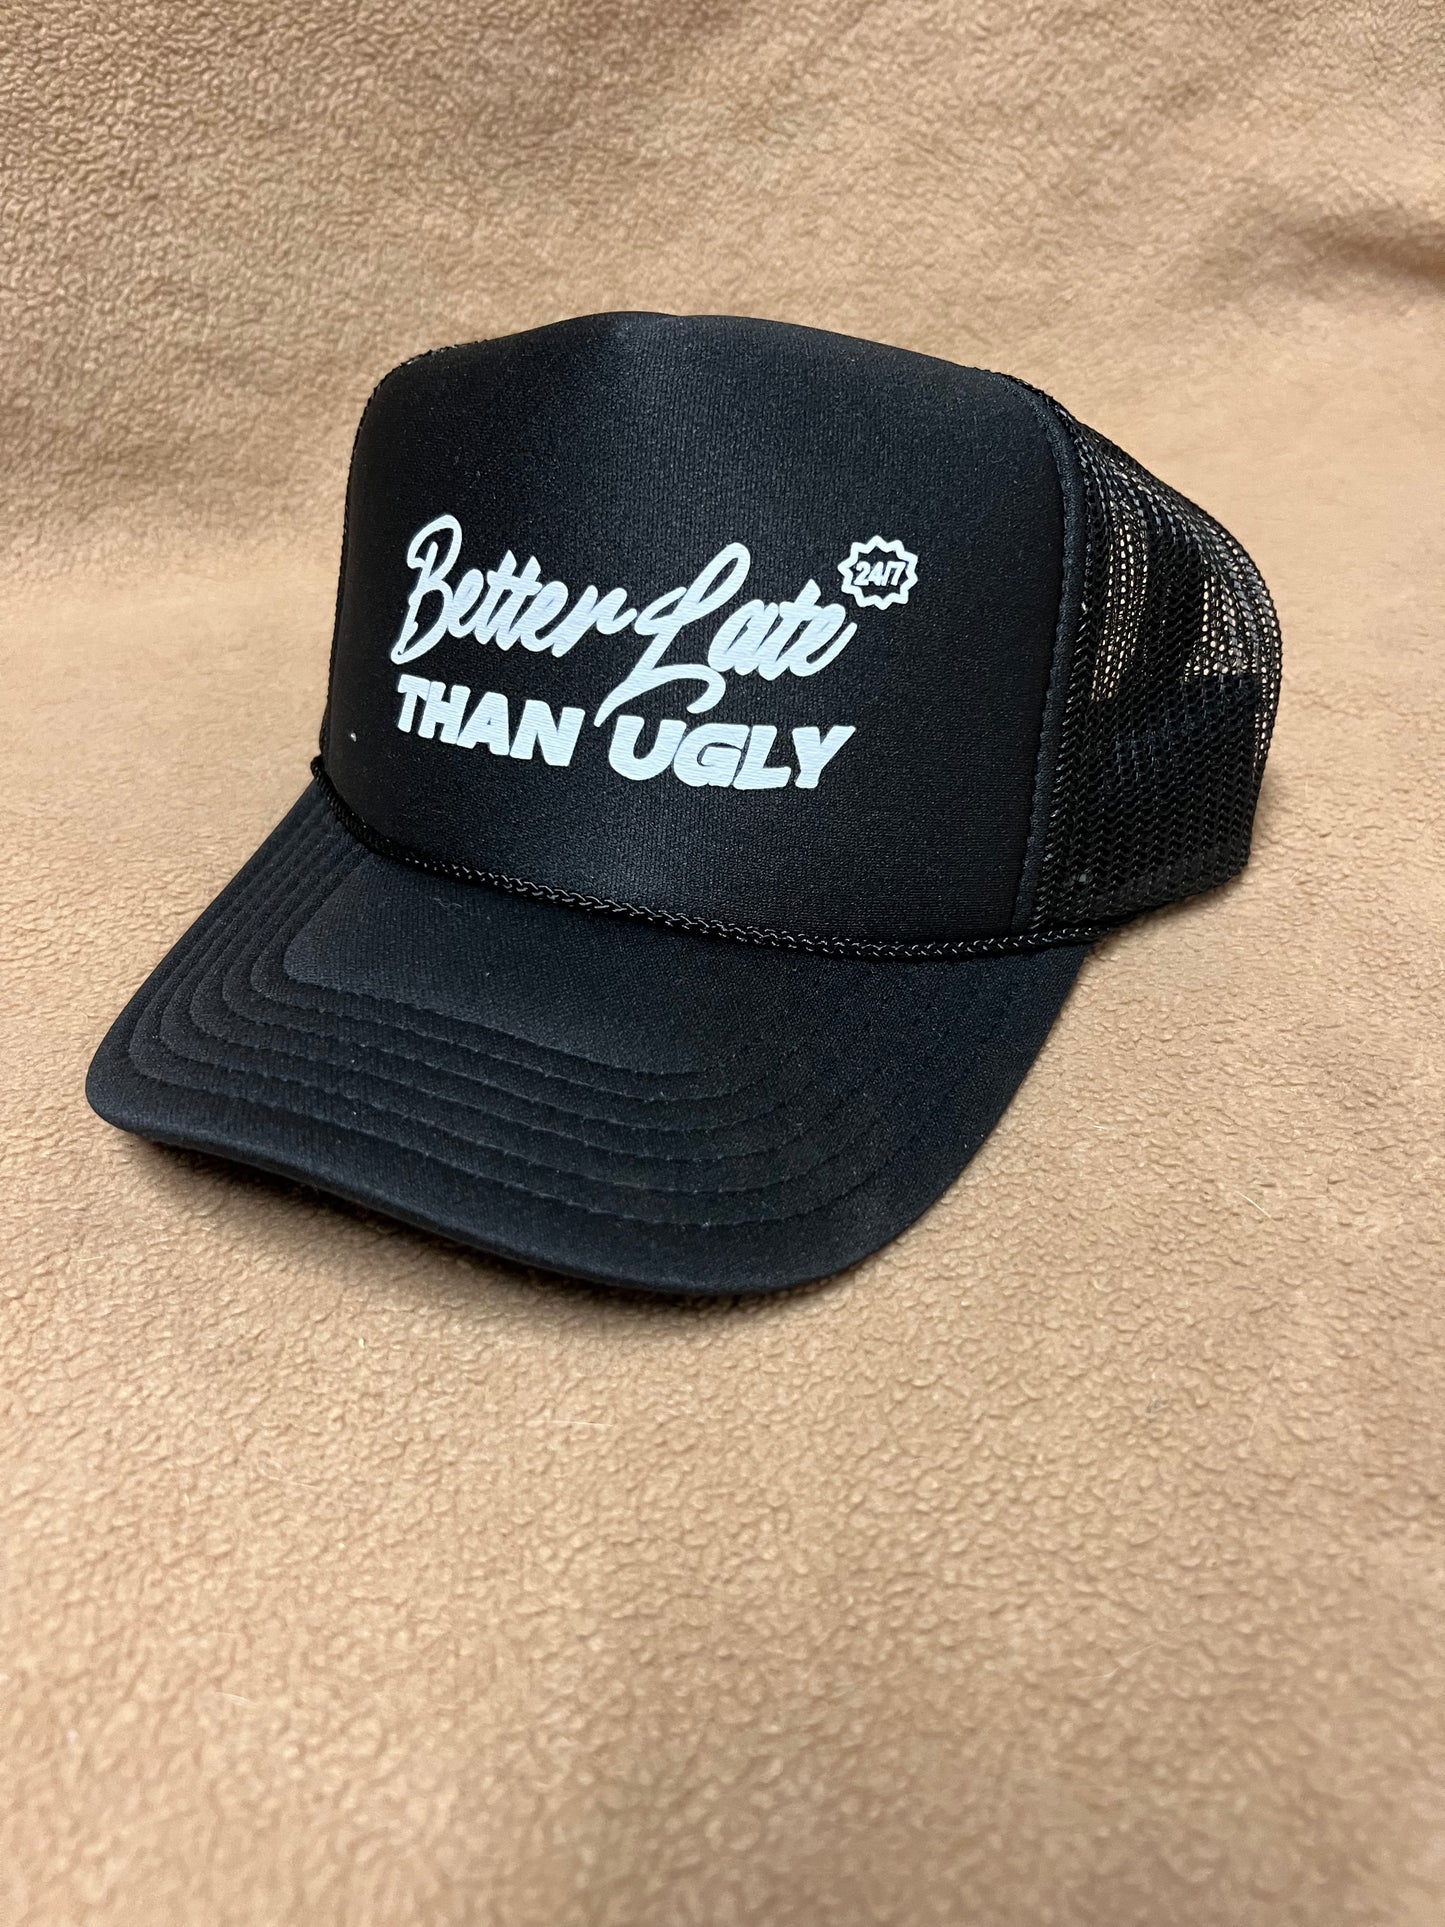 Trucker better late than ugly Hat